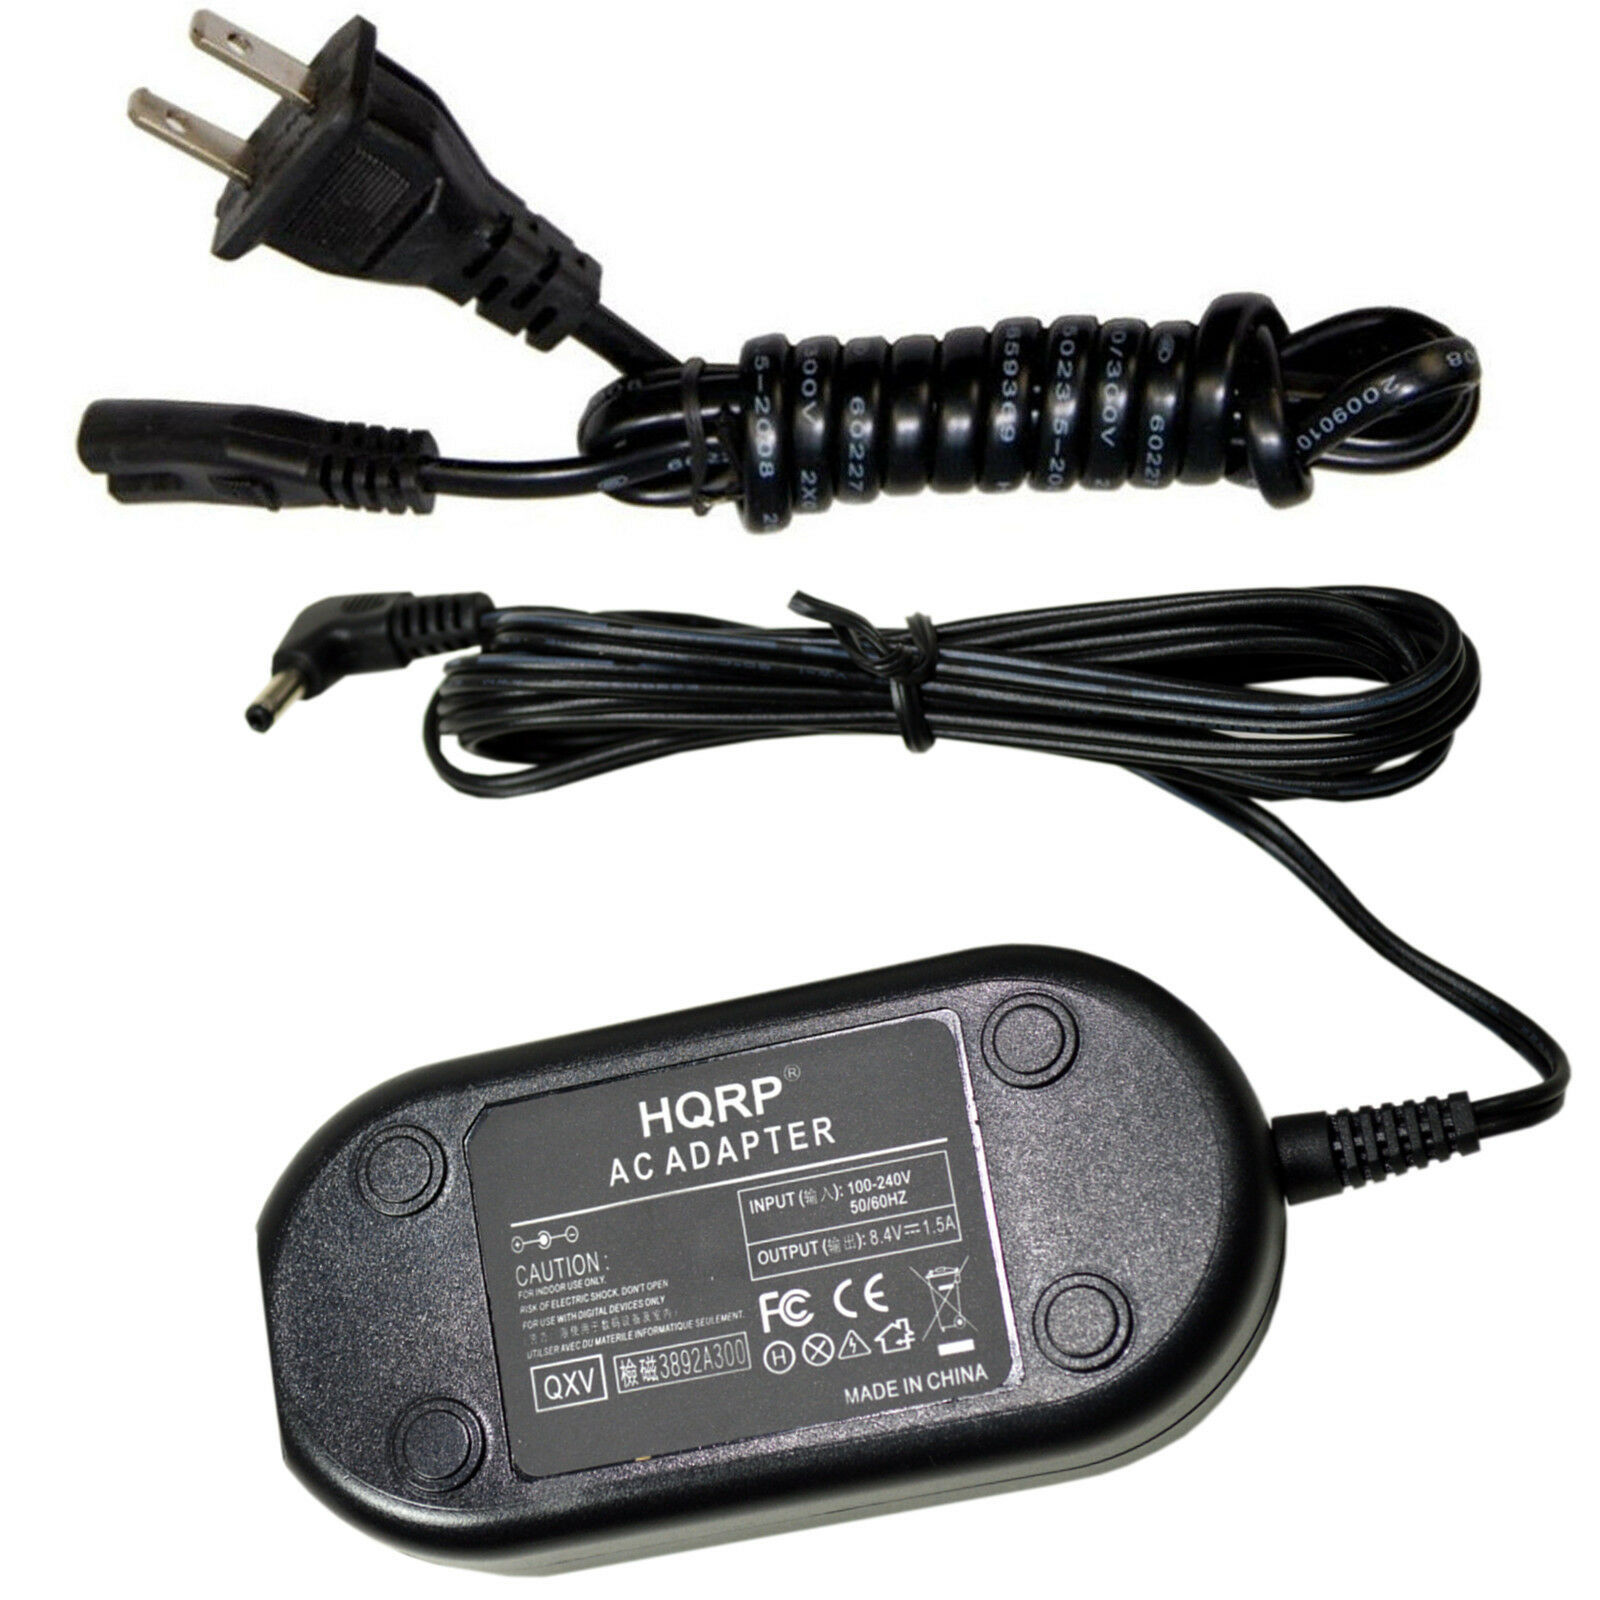 HQRP AC Adapter Charger for Canon XA10, FS40, FS400, Optura 200MC, 300, 600, S1 - $17.91